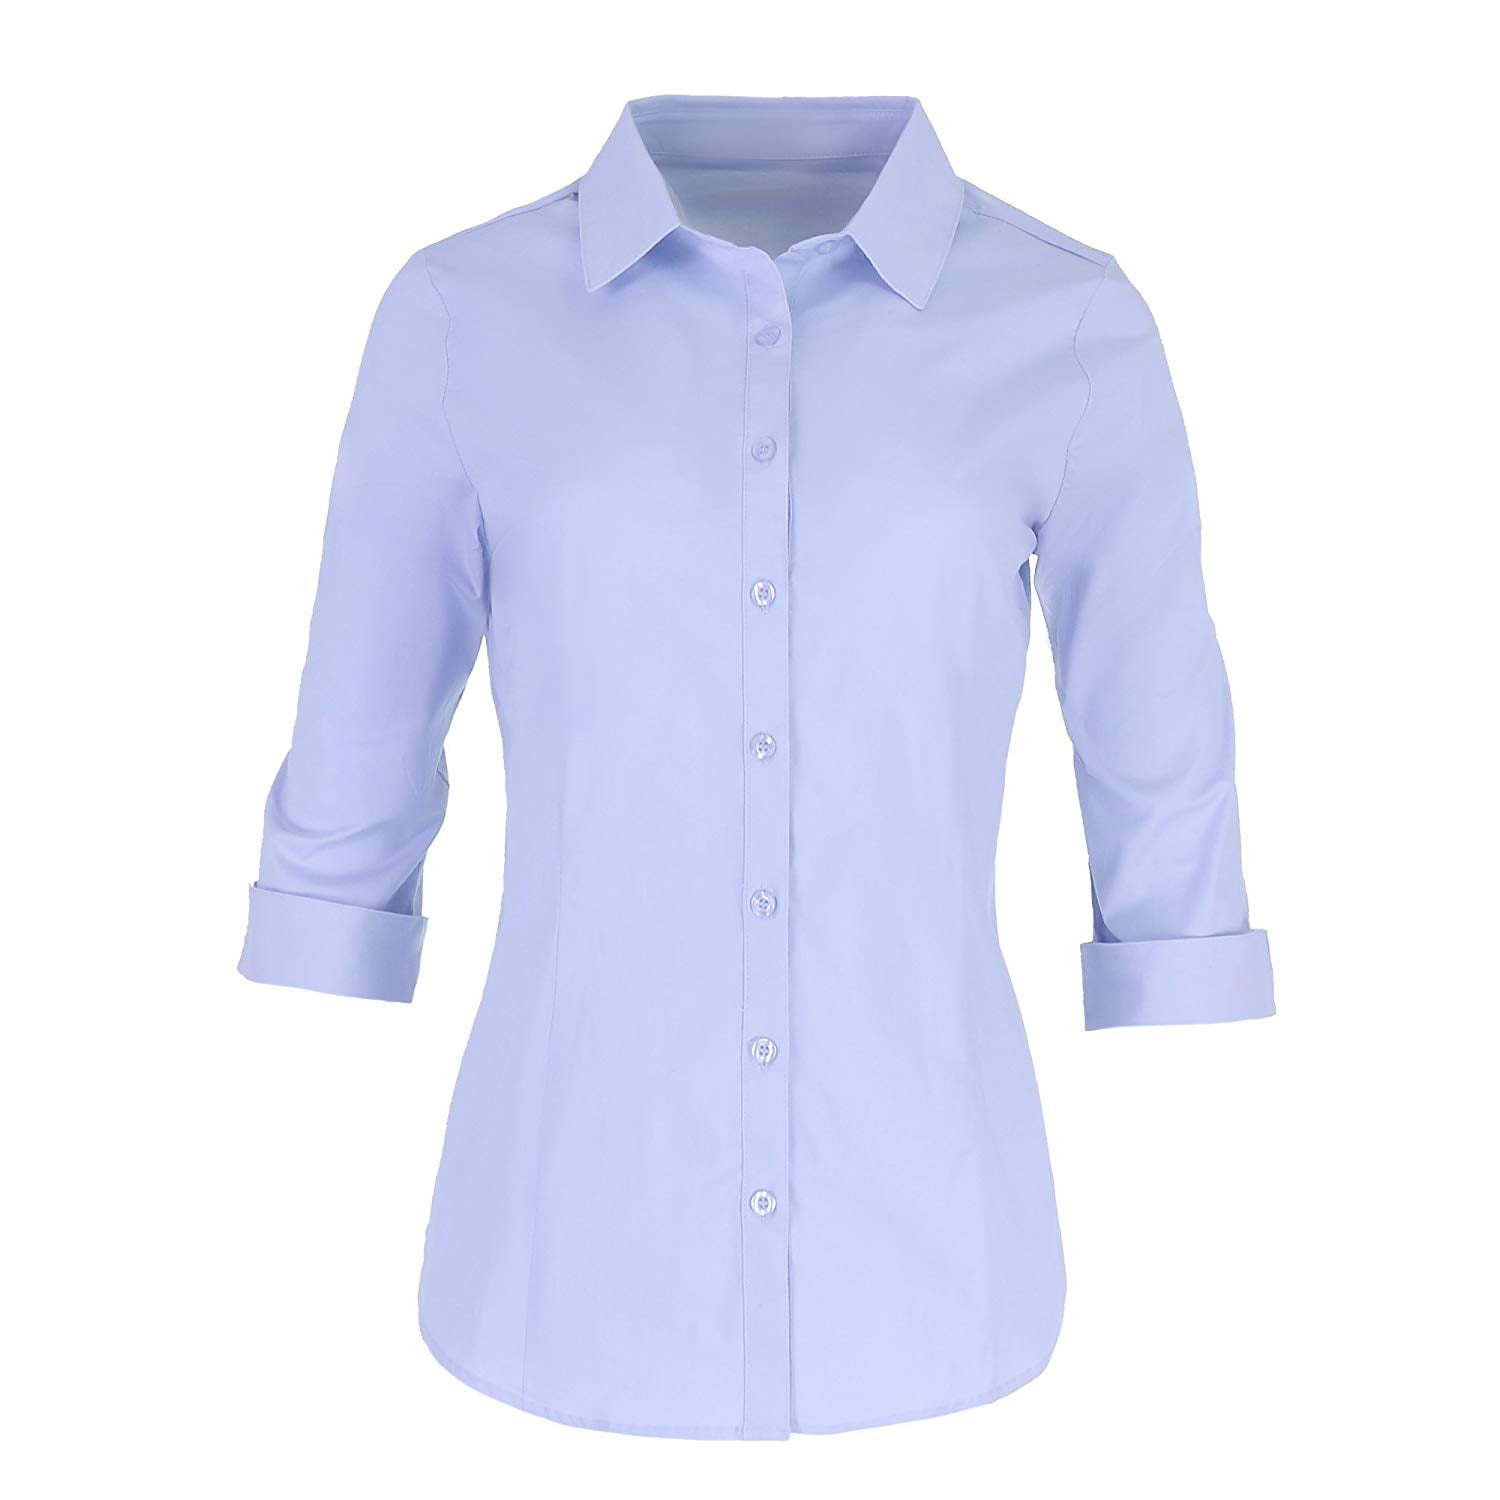 Pier 17 - Pier 17 Button Down Shirts for Women by Tailored, 3/4 Sleeve ...